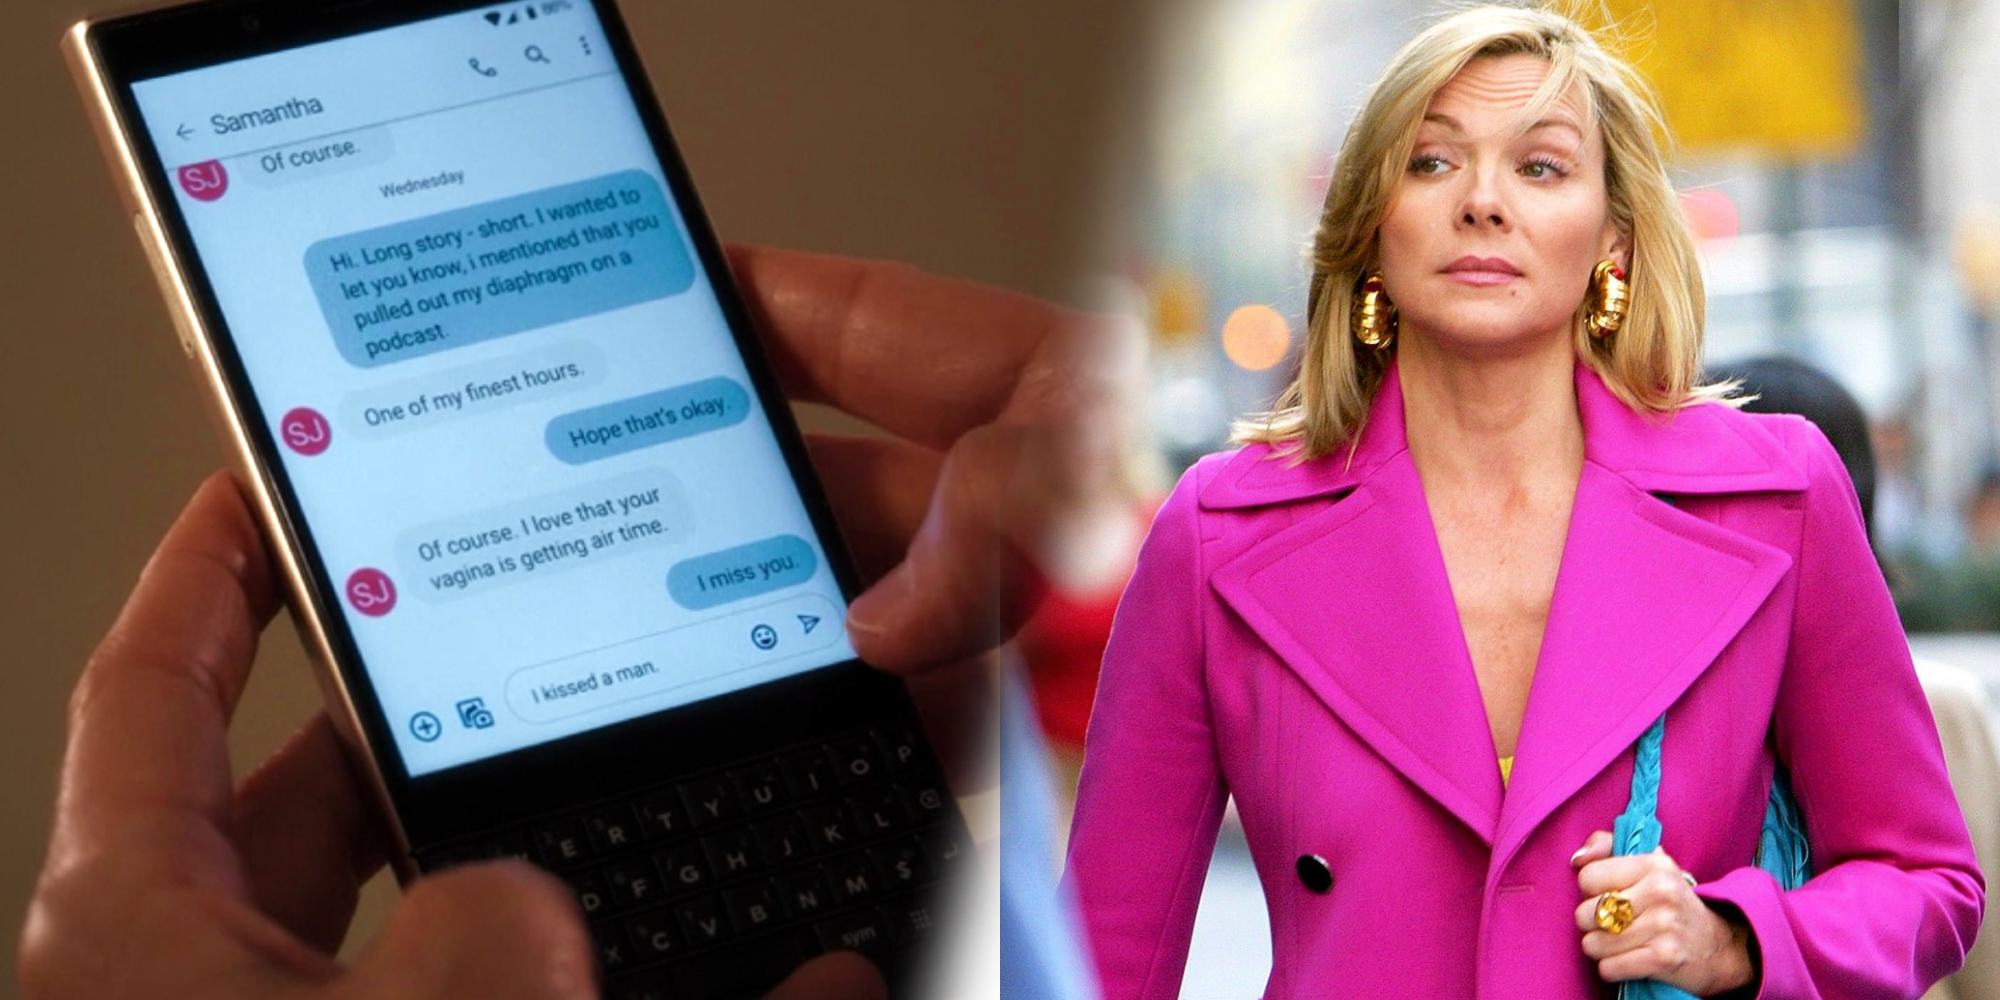 Split image of Carrie texting Samantha and Samantha in AJLT and SATC